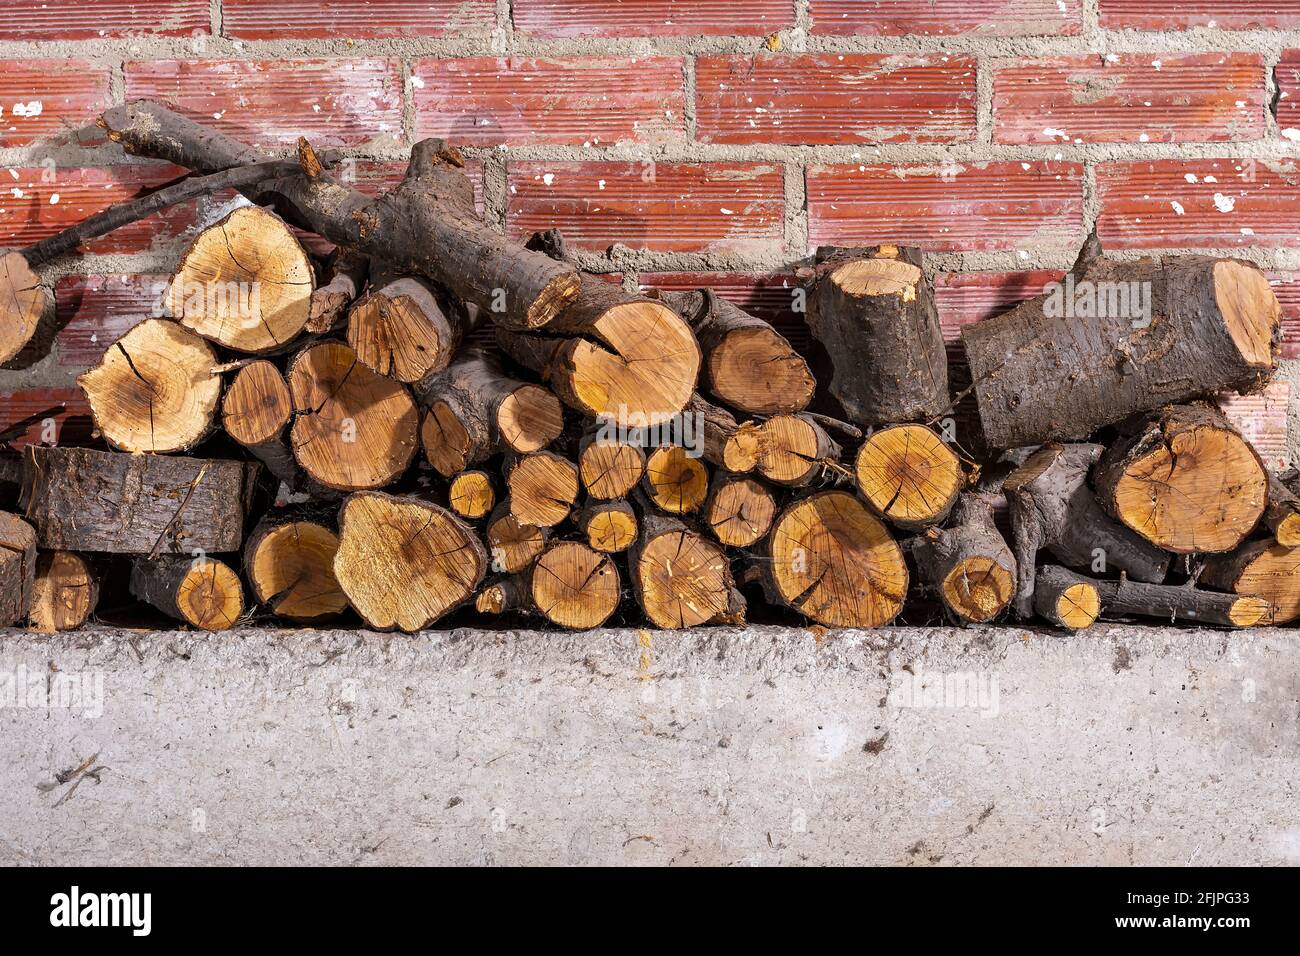 Firewood stacked on concrete and a brick wall.The photograph is a horizontal shot. Stock Photo